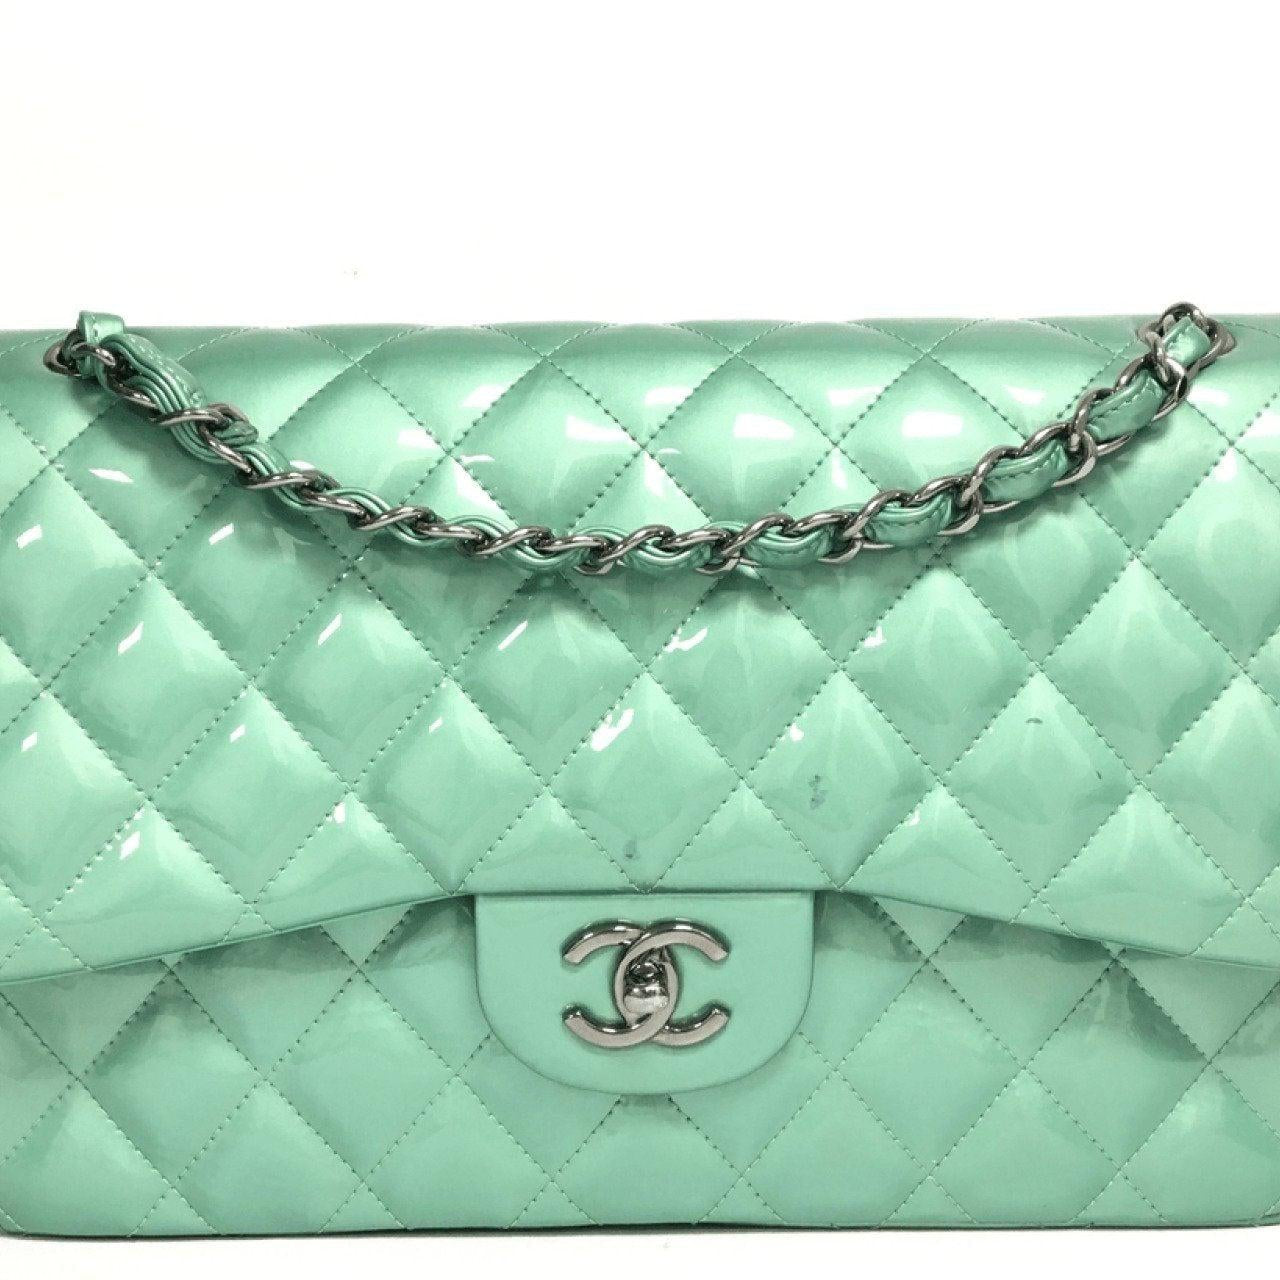 Chanel Light Green Quilted Patent Leather Classic Jumbo Double Flap Bag